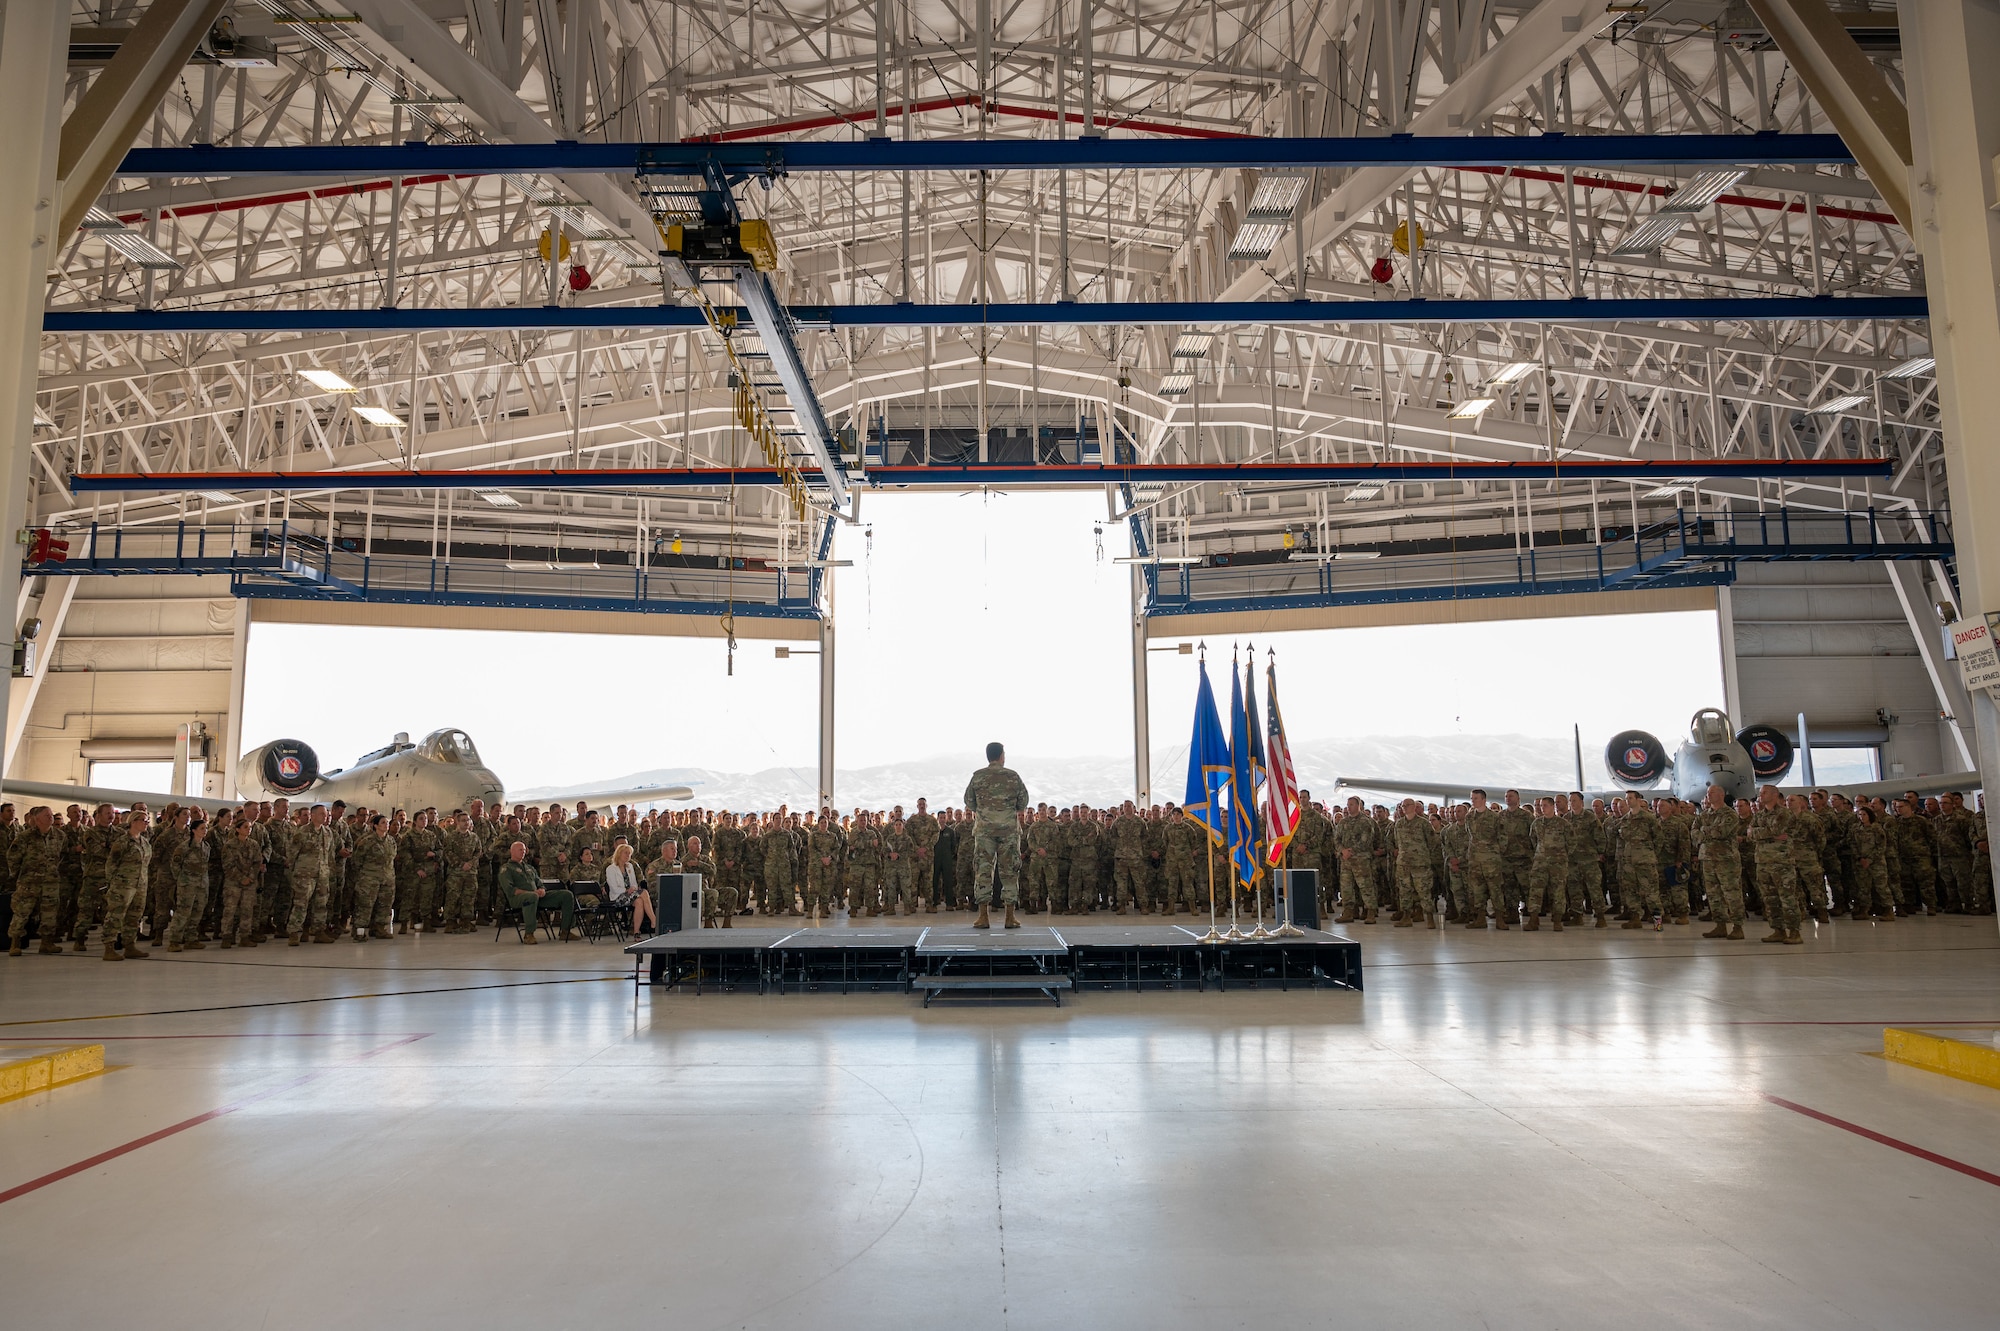 A picture of a hanger with the doors open and a crowd of Airmen on the hangar floor with two A-10 Thunderbolt IIs